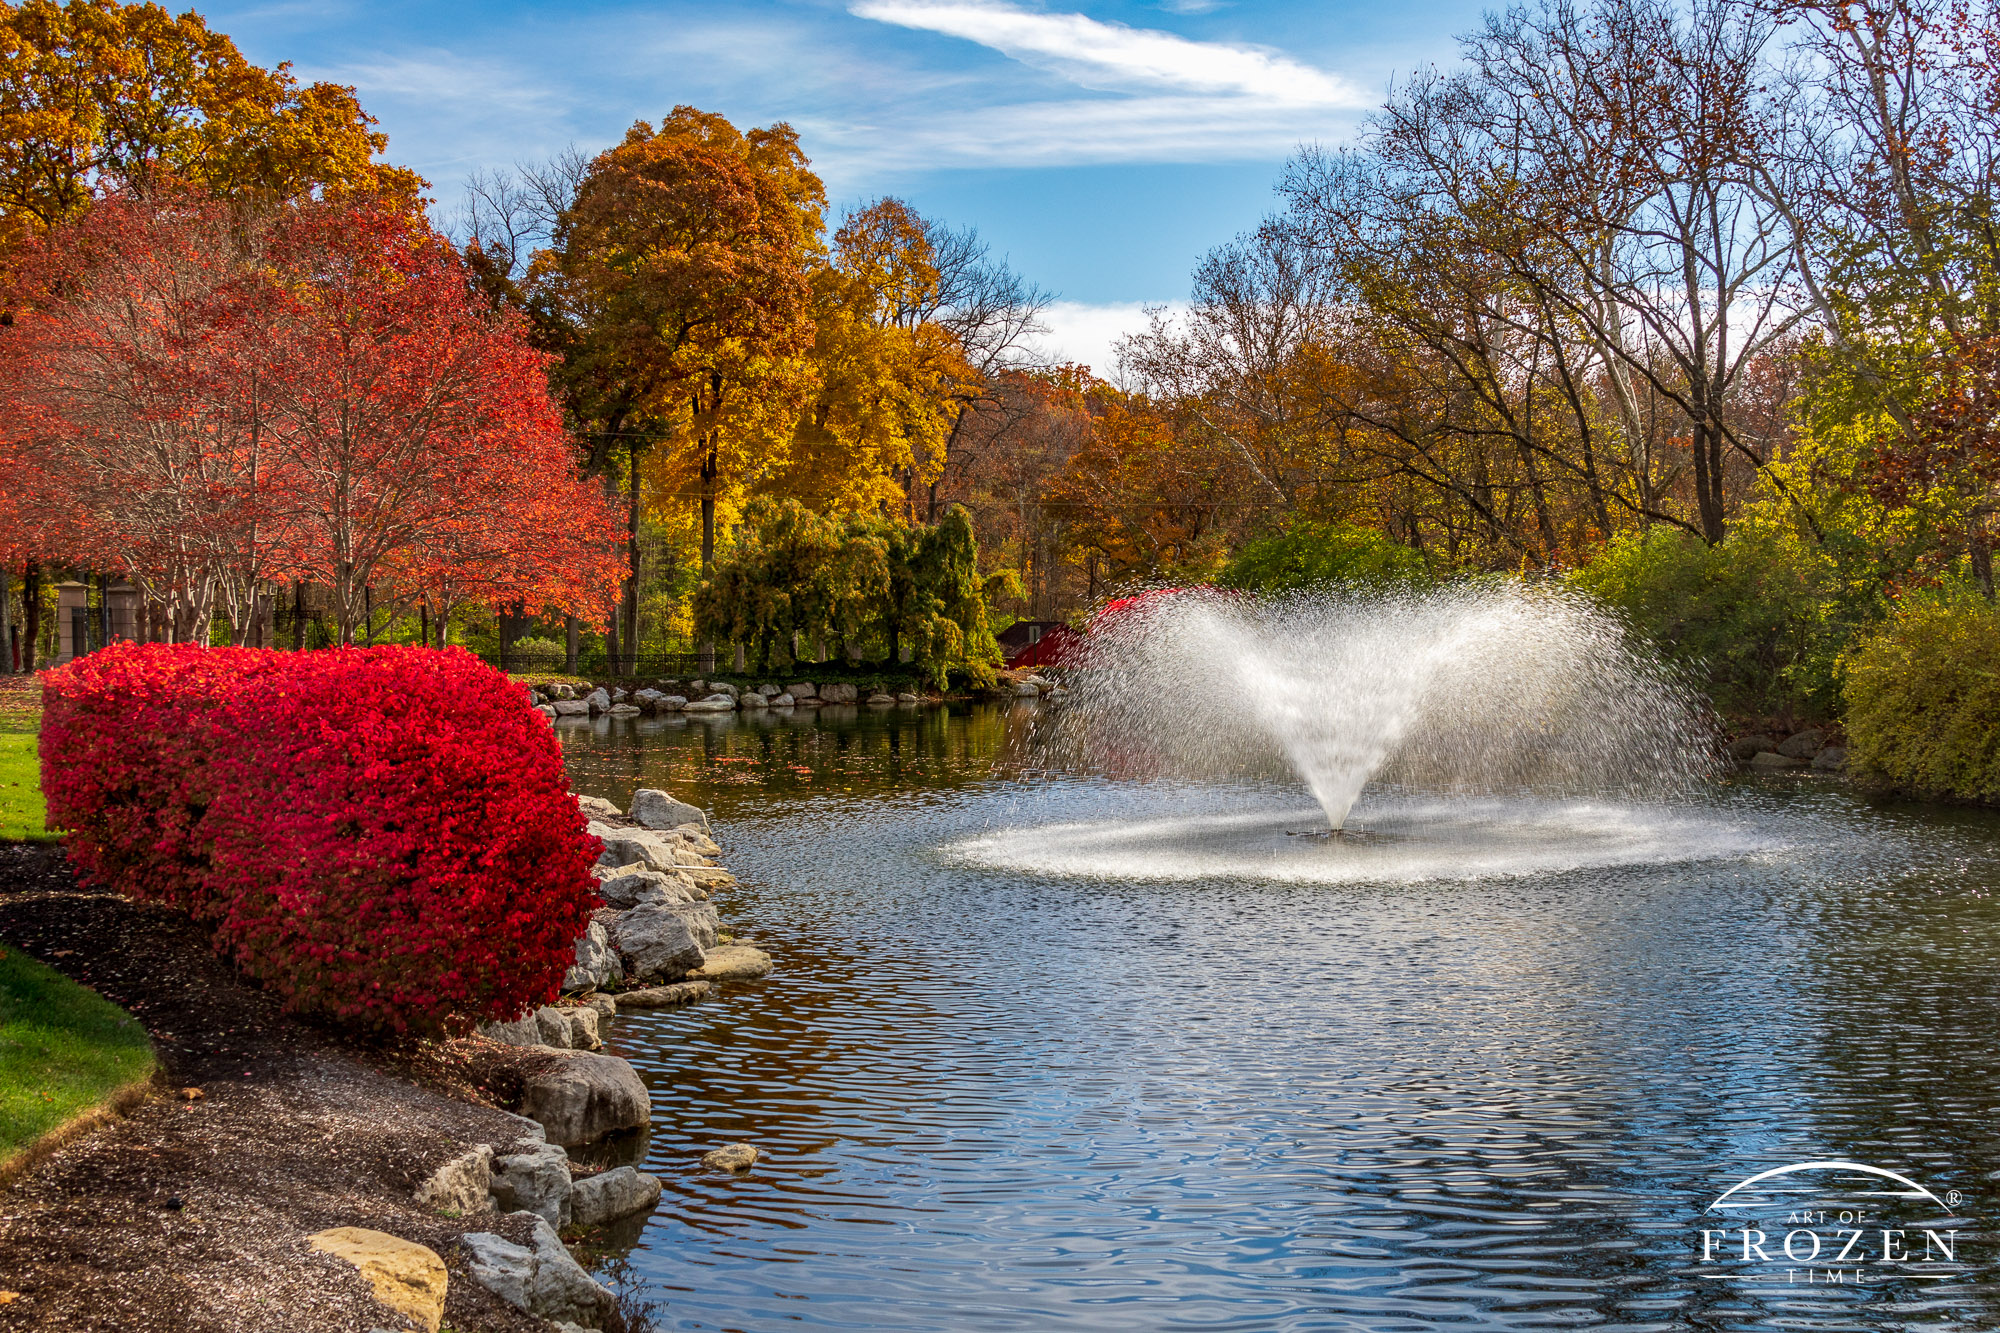 A fountain's spray glistens in the sunlight on a fall day where the surrounding vegetation glows in reds and yellows.